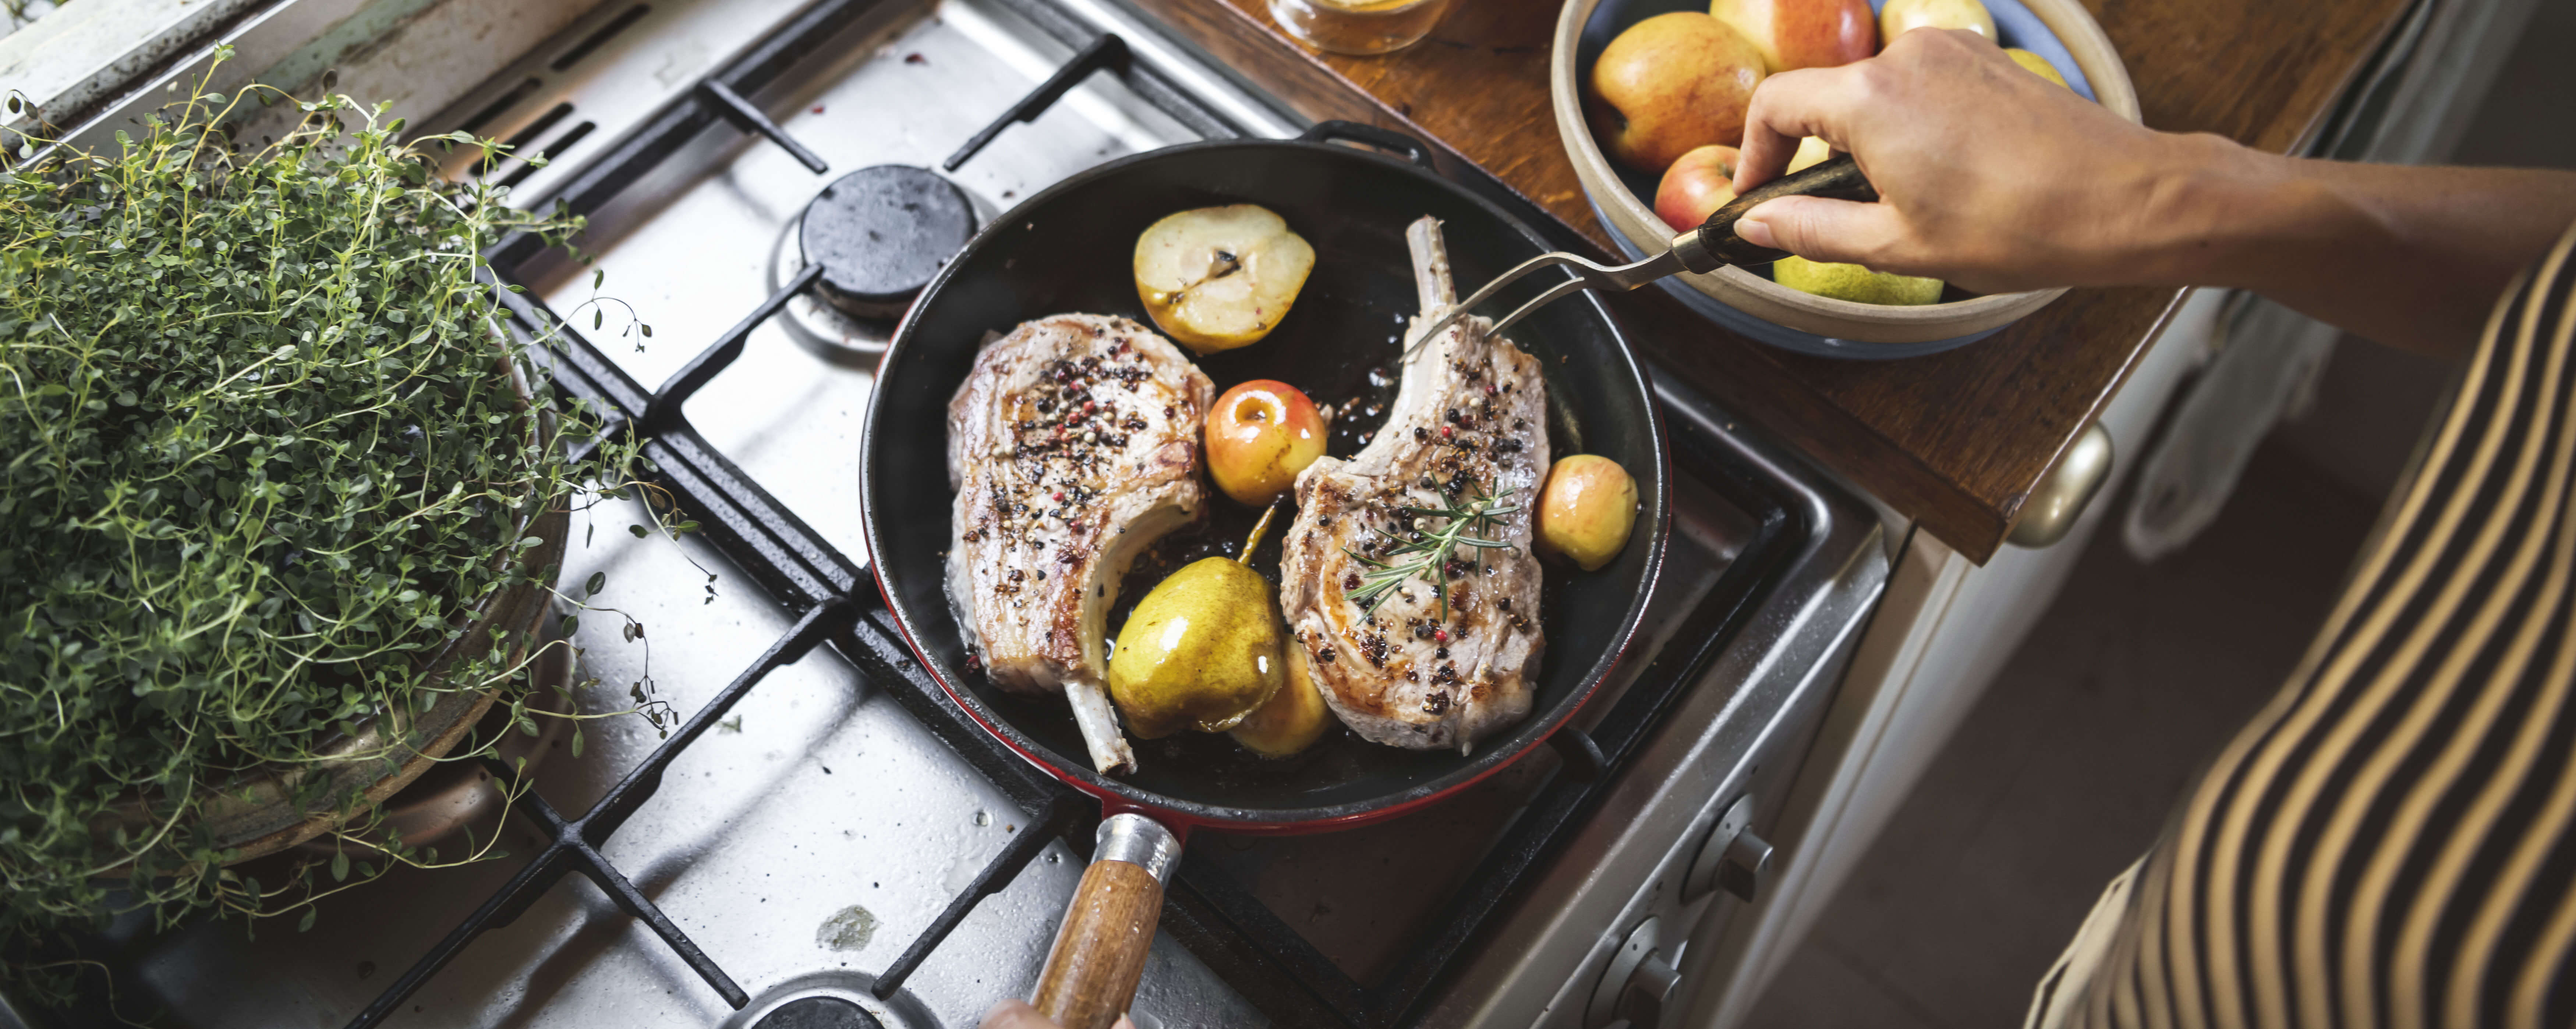 A person is cooking pork chops on a propane stovetop. In the frying pan are fresh herbs, apple and pear halves.